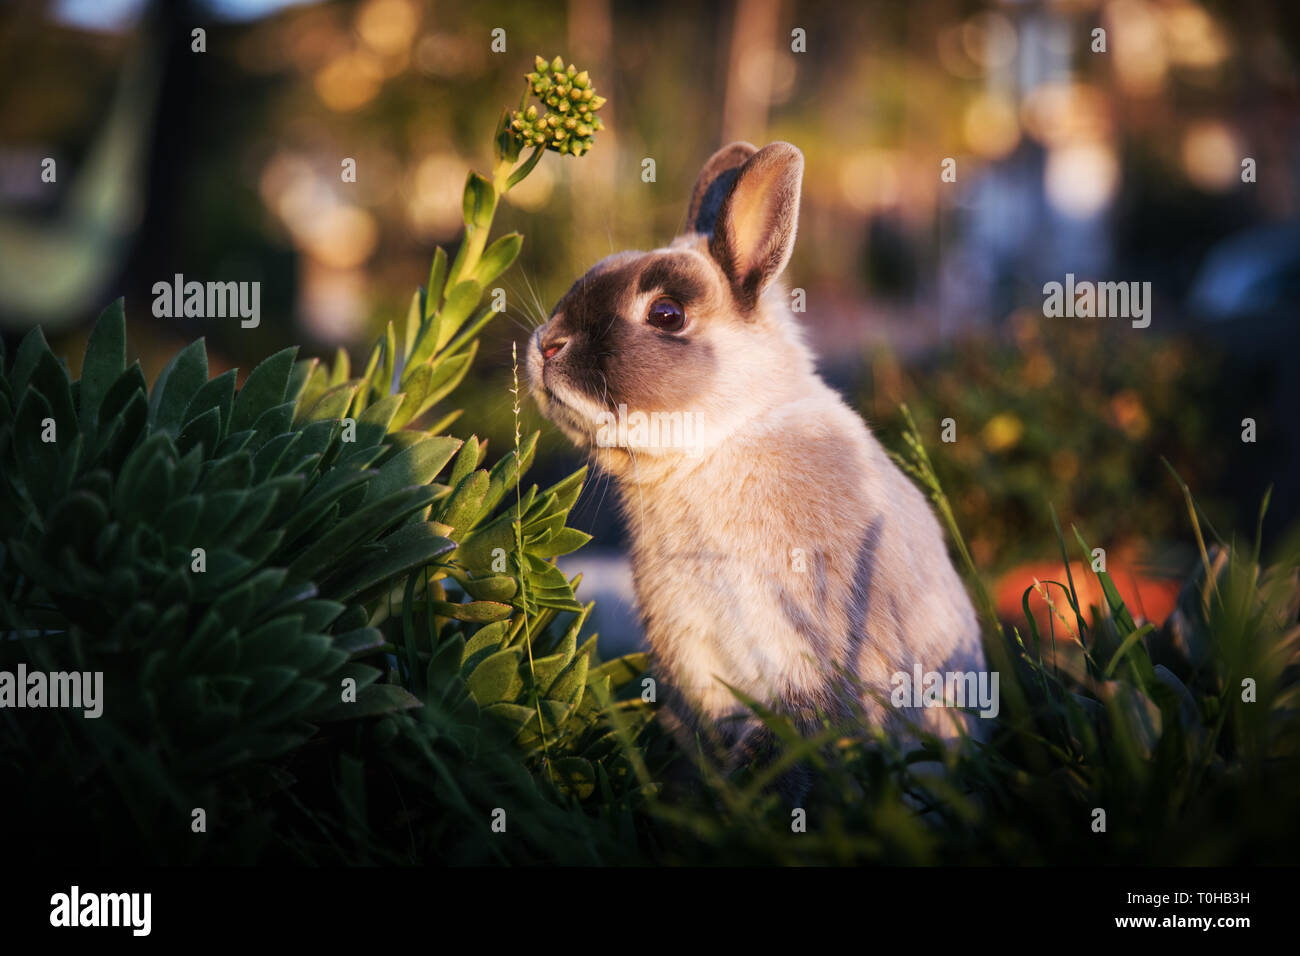 A dwarf bunny in a grassy garden reaching up to a succulent flower and staring at camera. Stock Photo